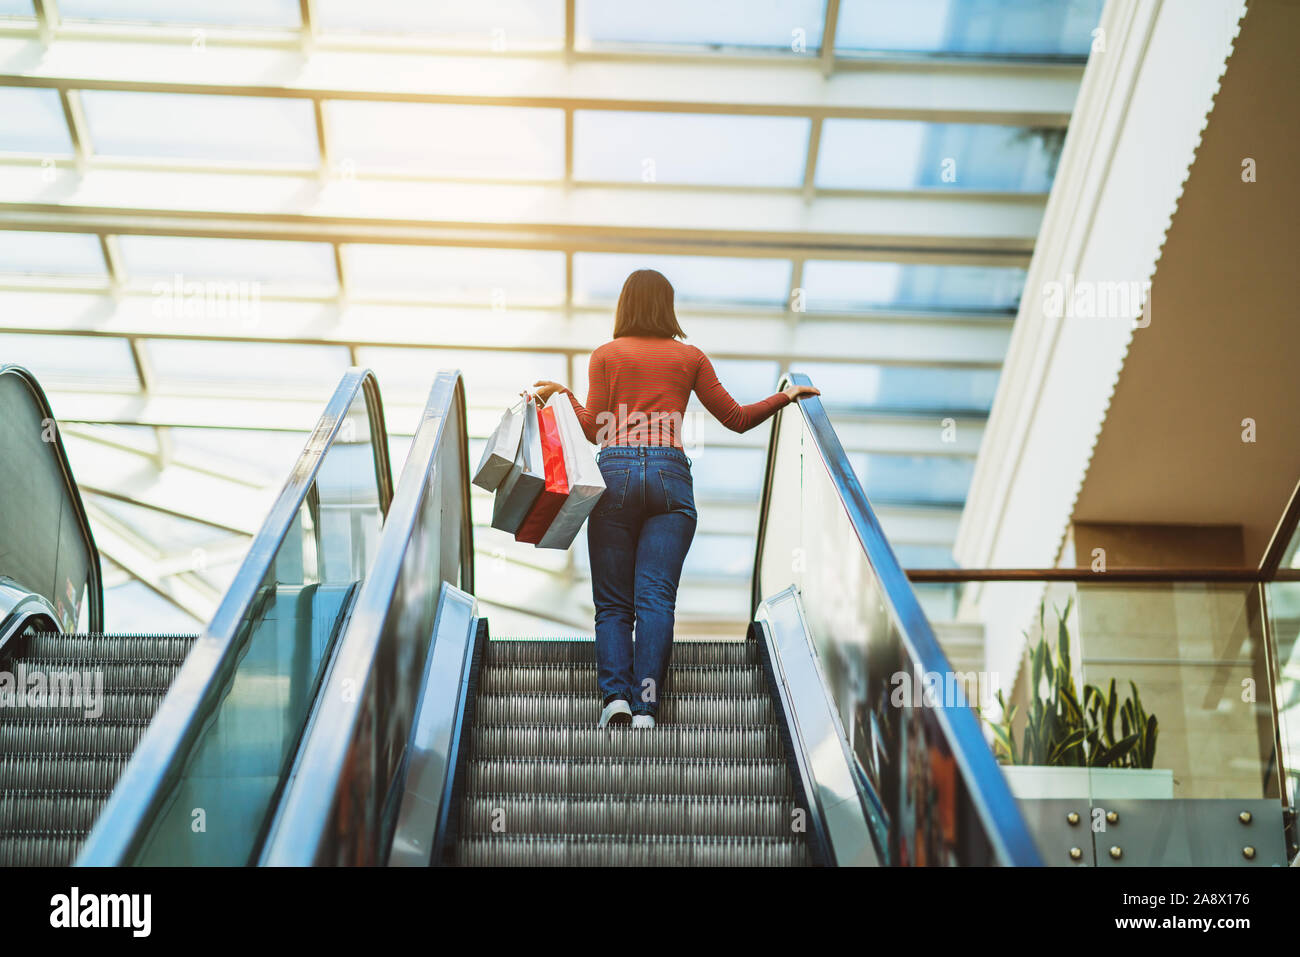 Young woman is walking on the escalator in a mall and shopping. Stock Photo